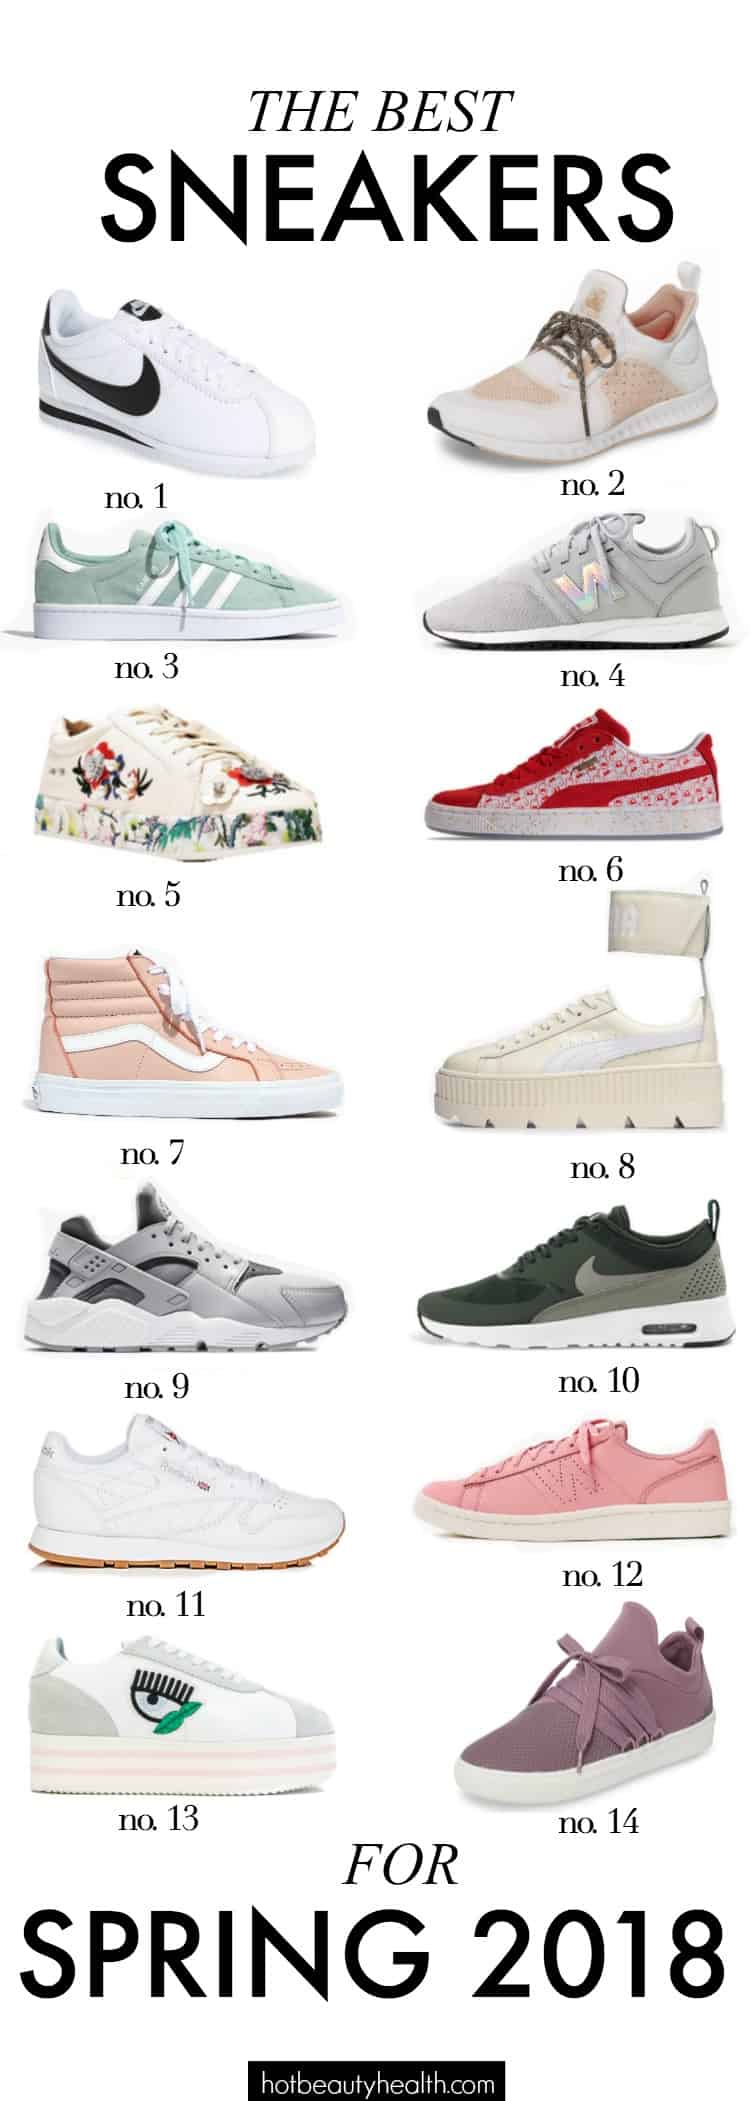 Shoe Love: The Best Sneakers for Spring 